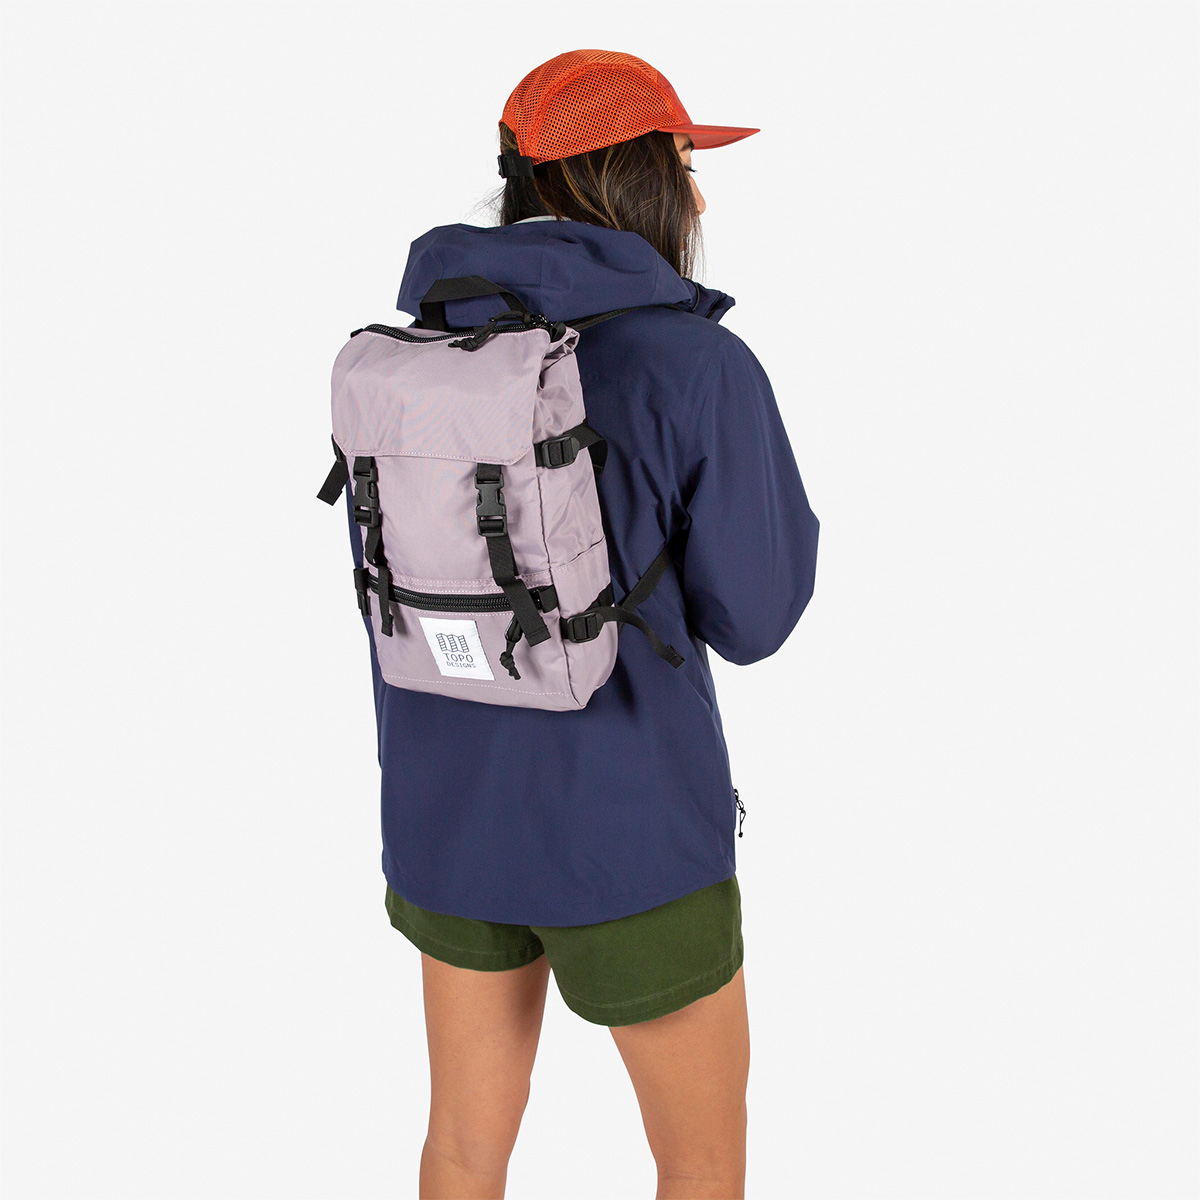 Topo Designs Rover Pack - Mini Light Purple, statement-making bag that’s the perfect size for errands around town or on the trail